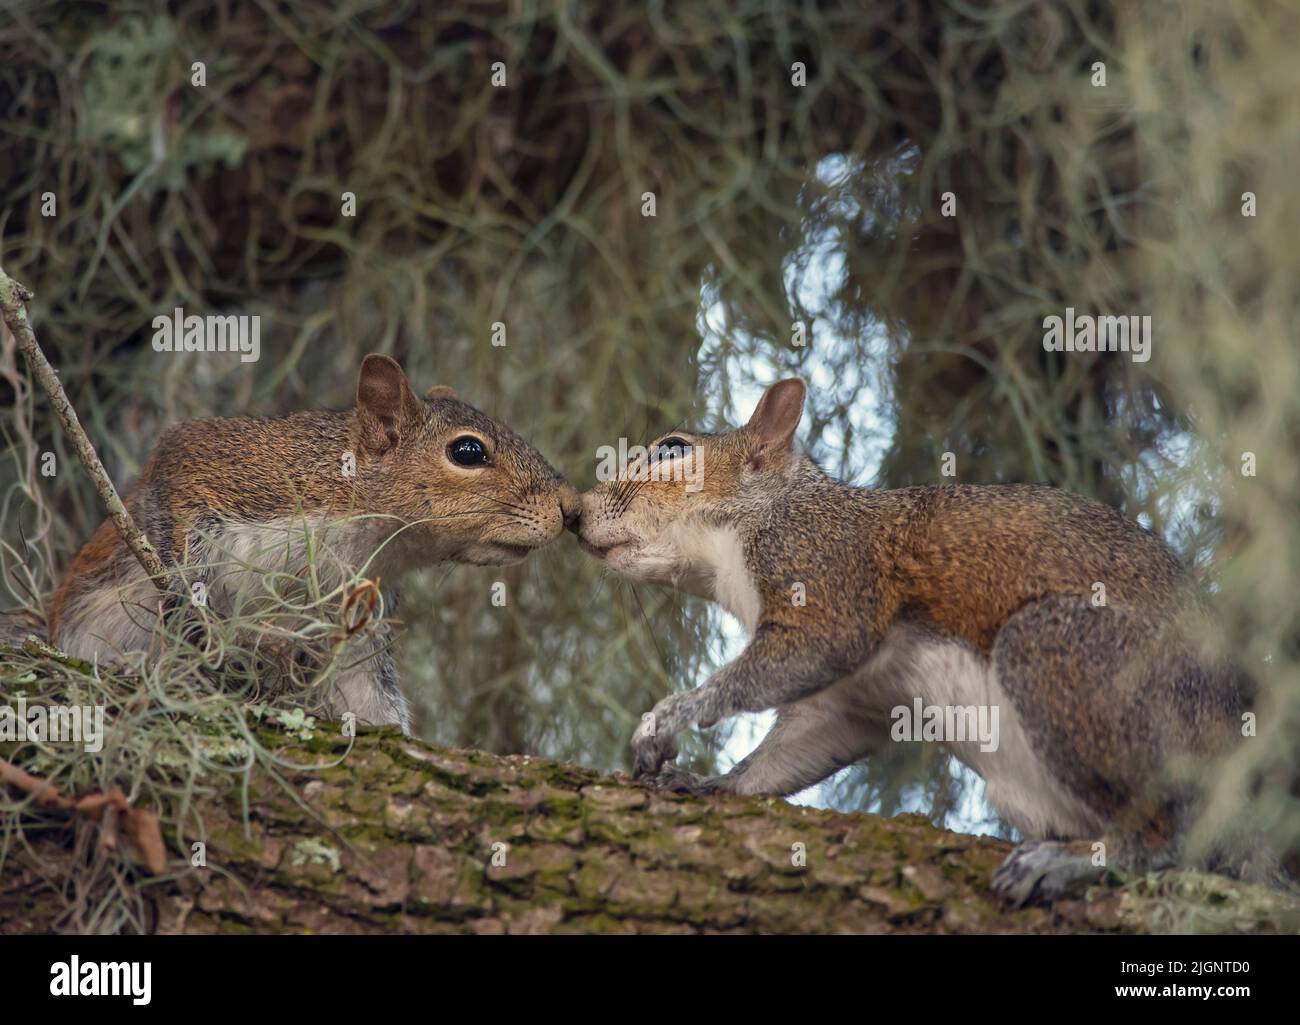 Two Young Squirrels on the Tree Stock Photo